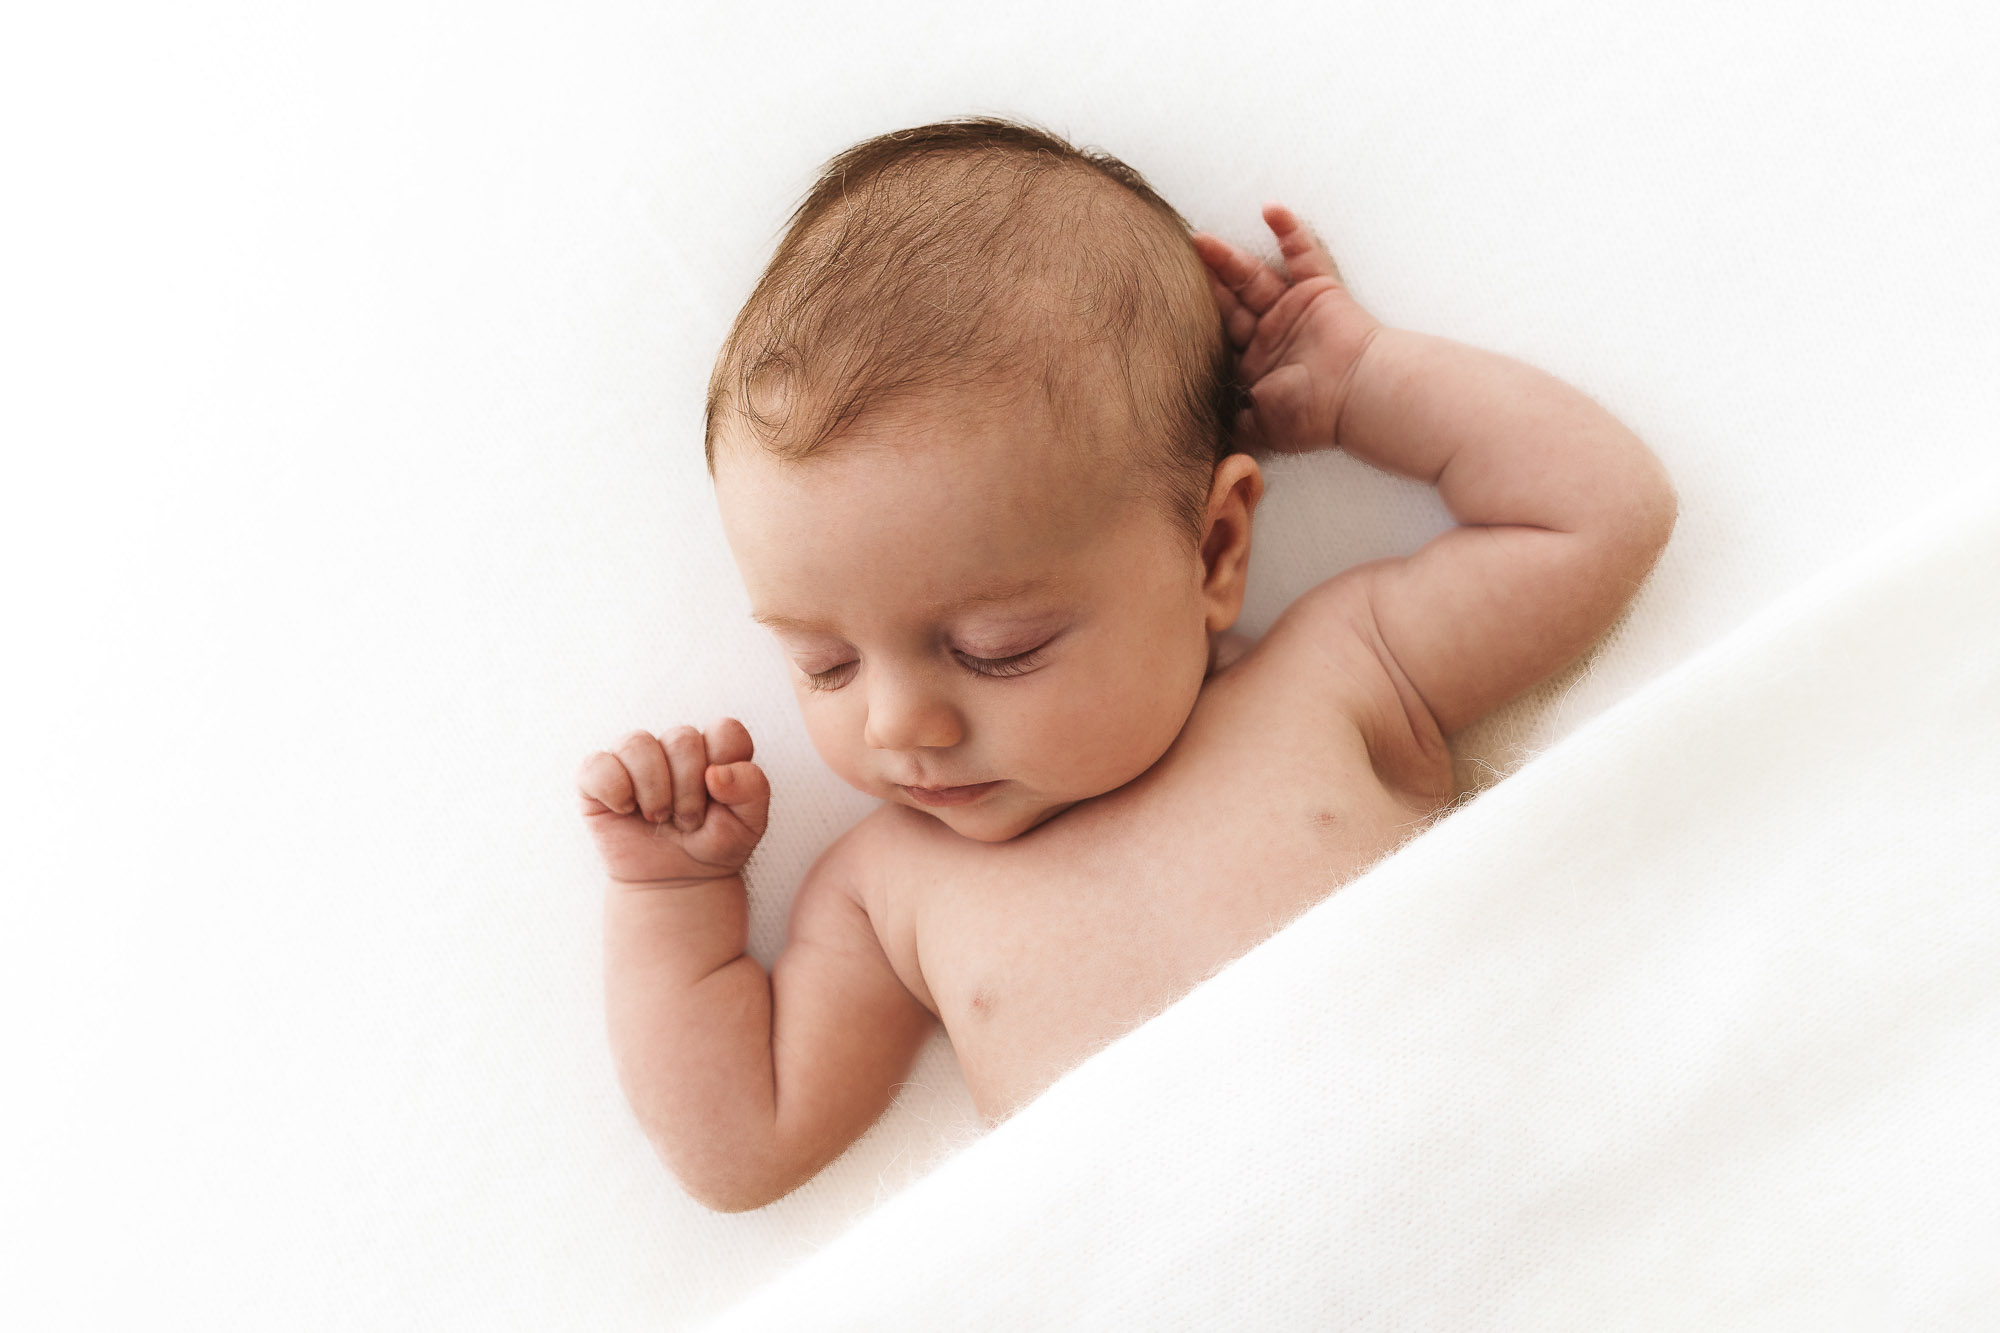 Sleeping baby photographed in Haslemere, Surrey